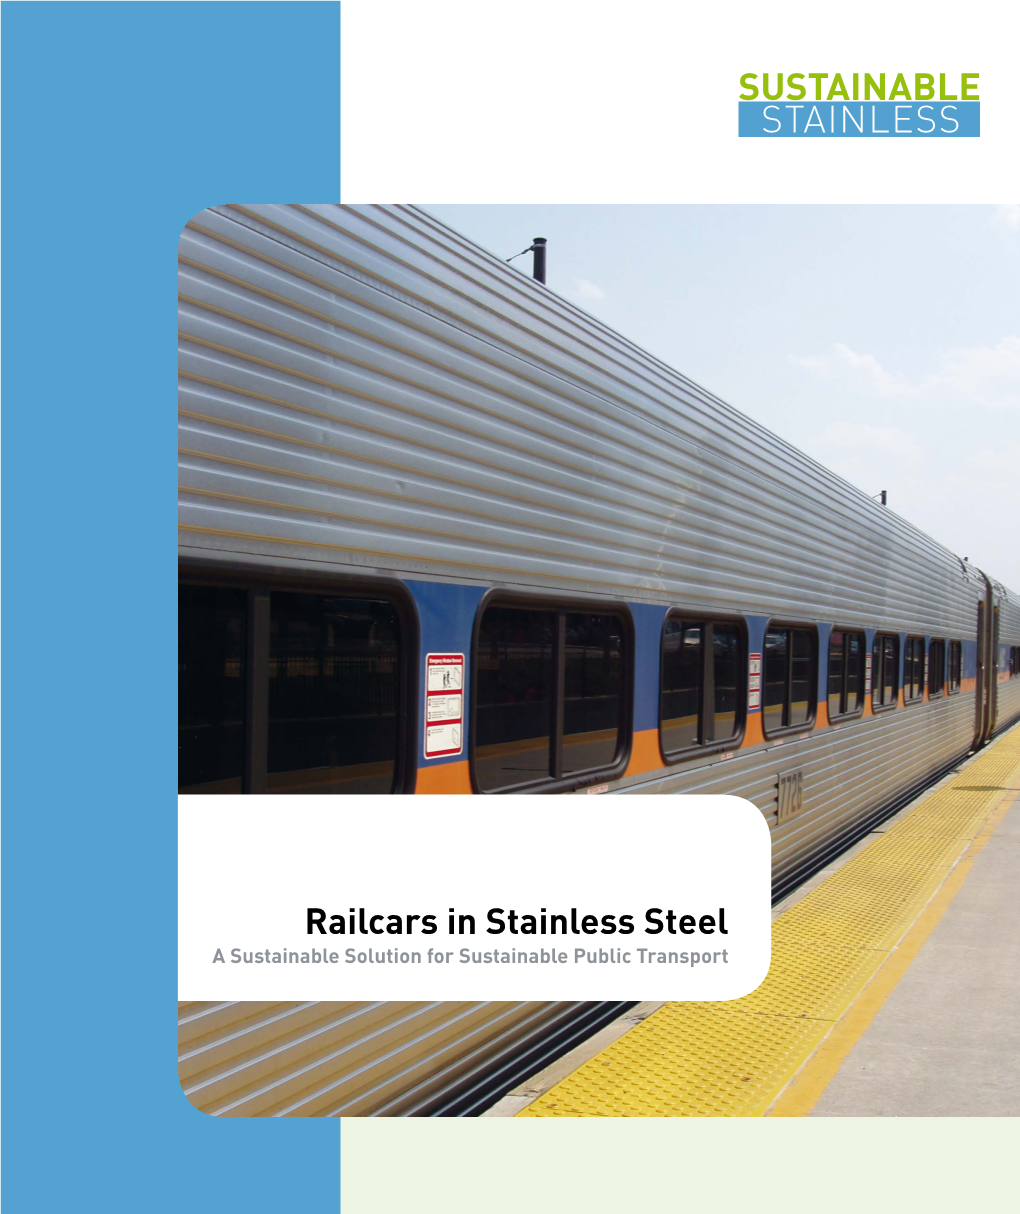 ISSF Railcars in Stainless Steel